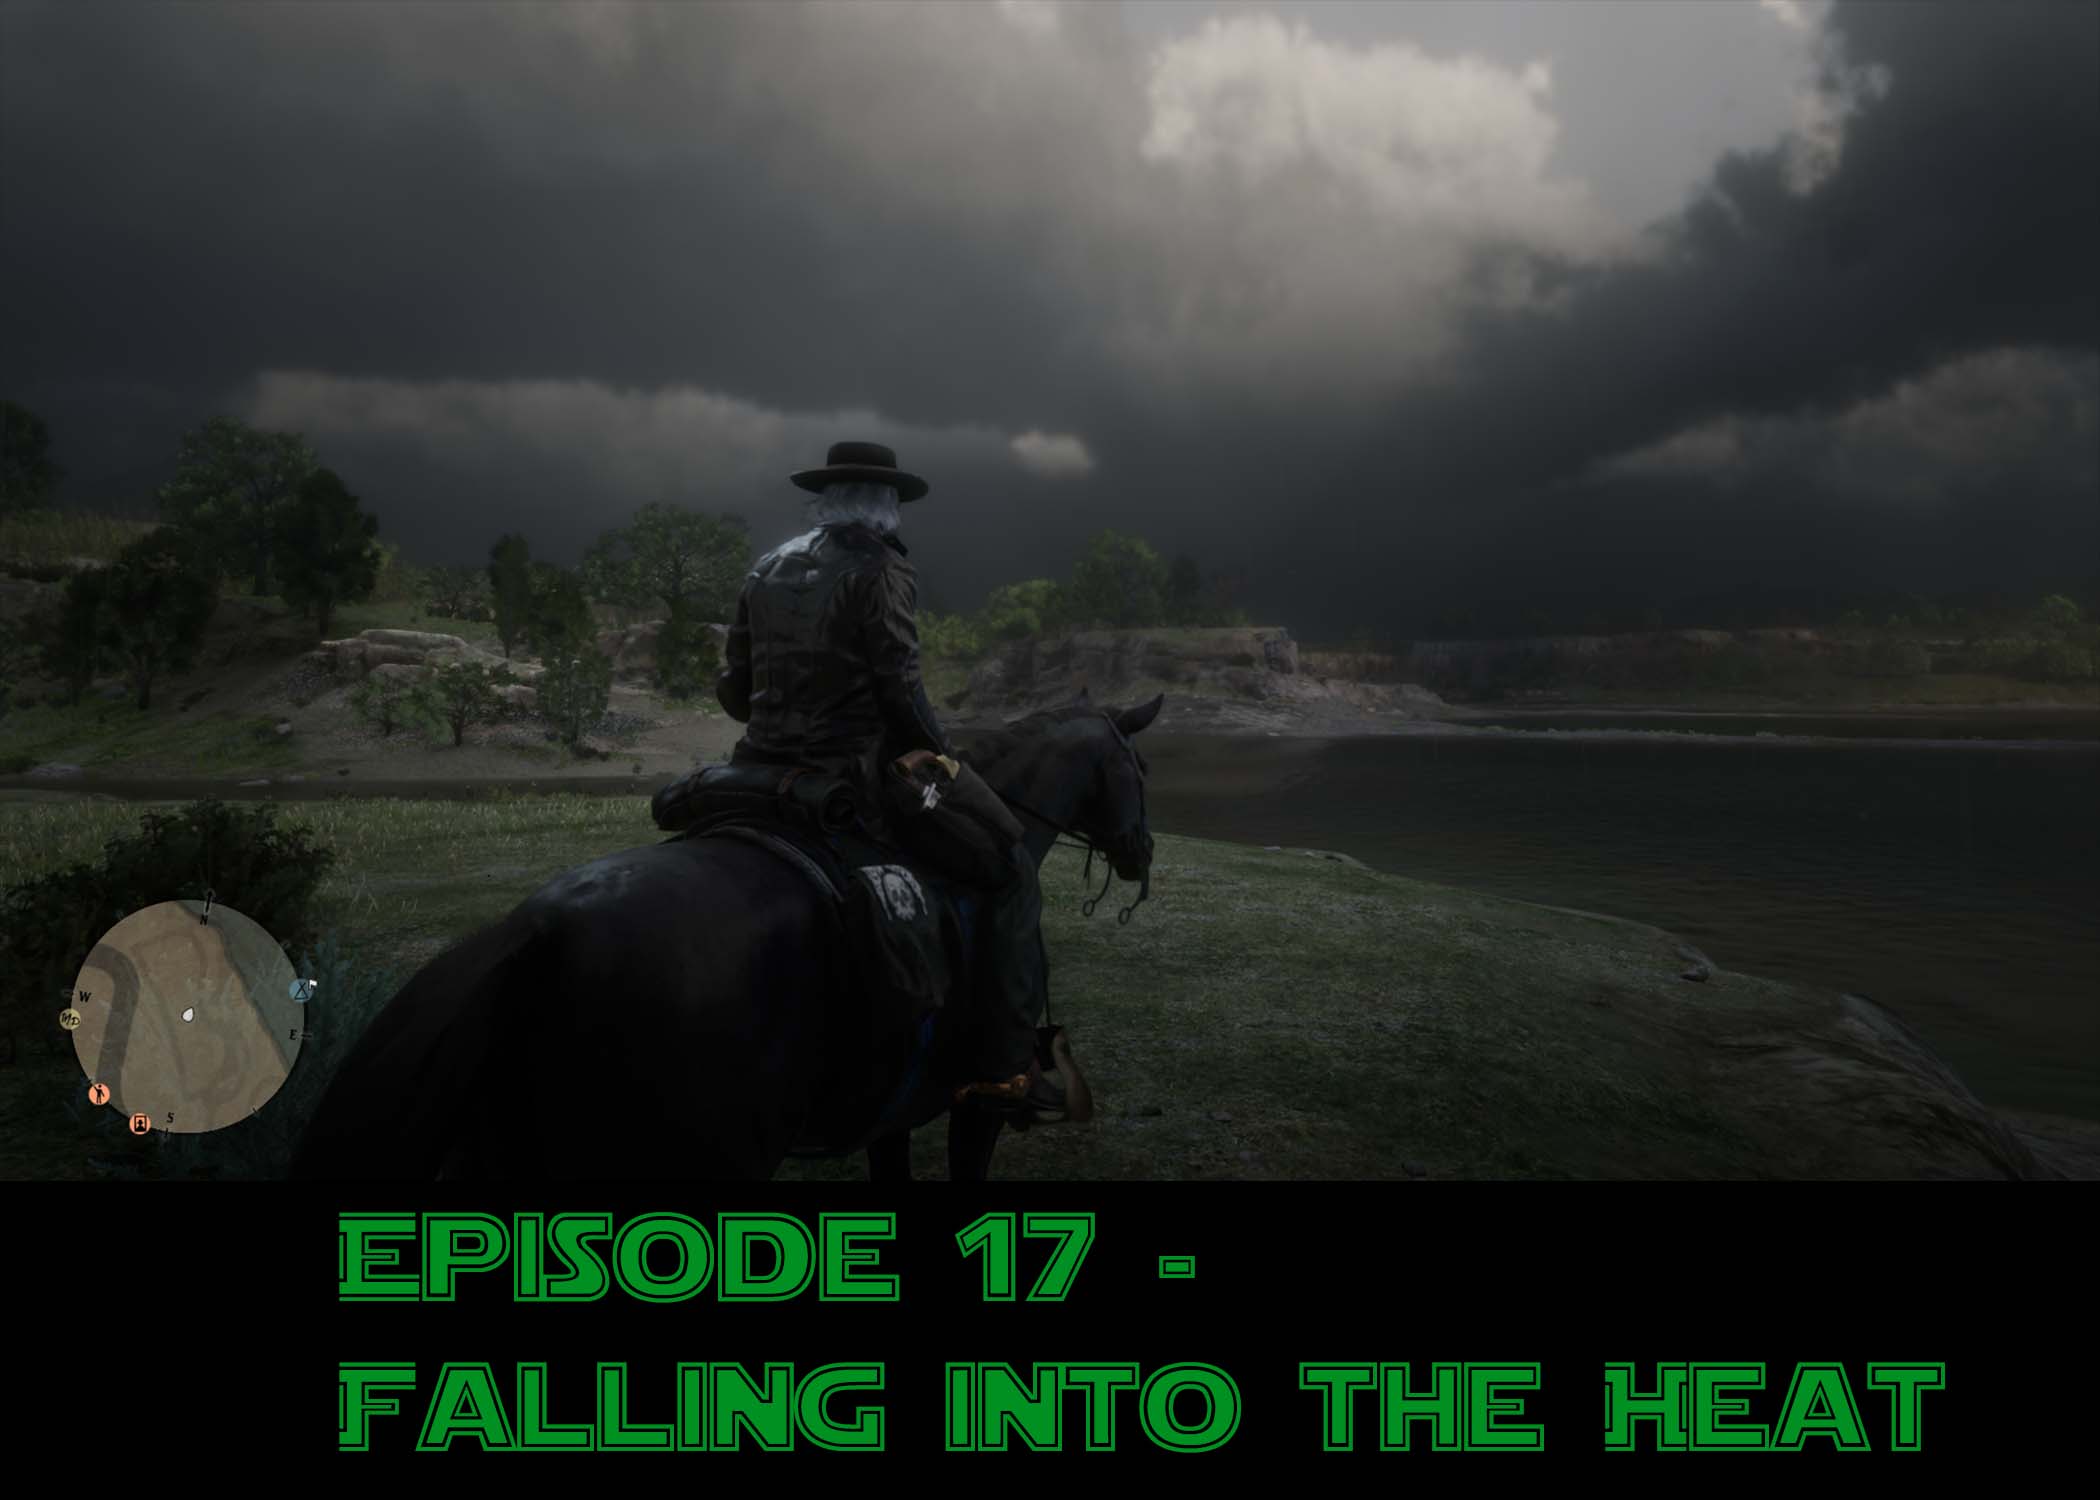 Episode 17 - Falling Into The Heat